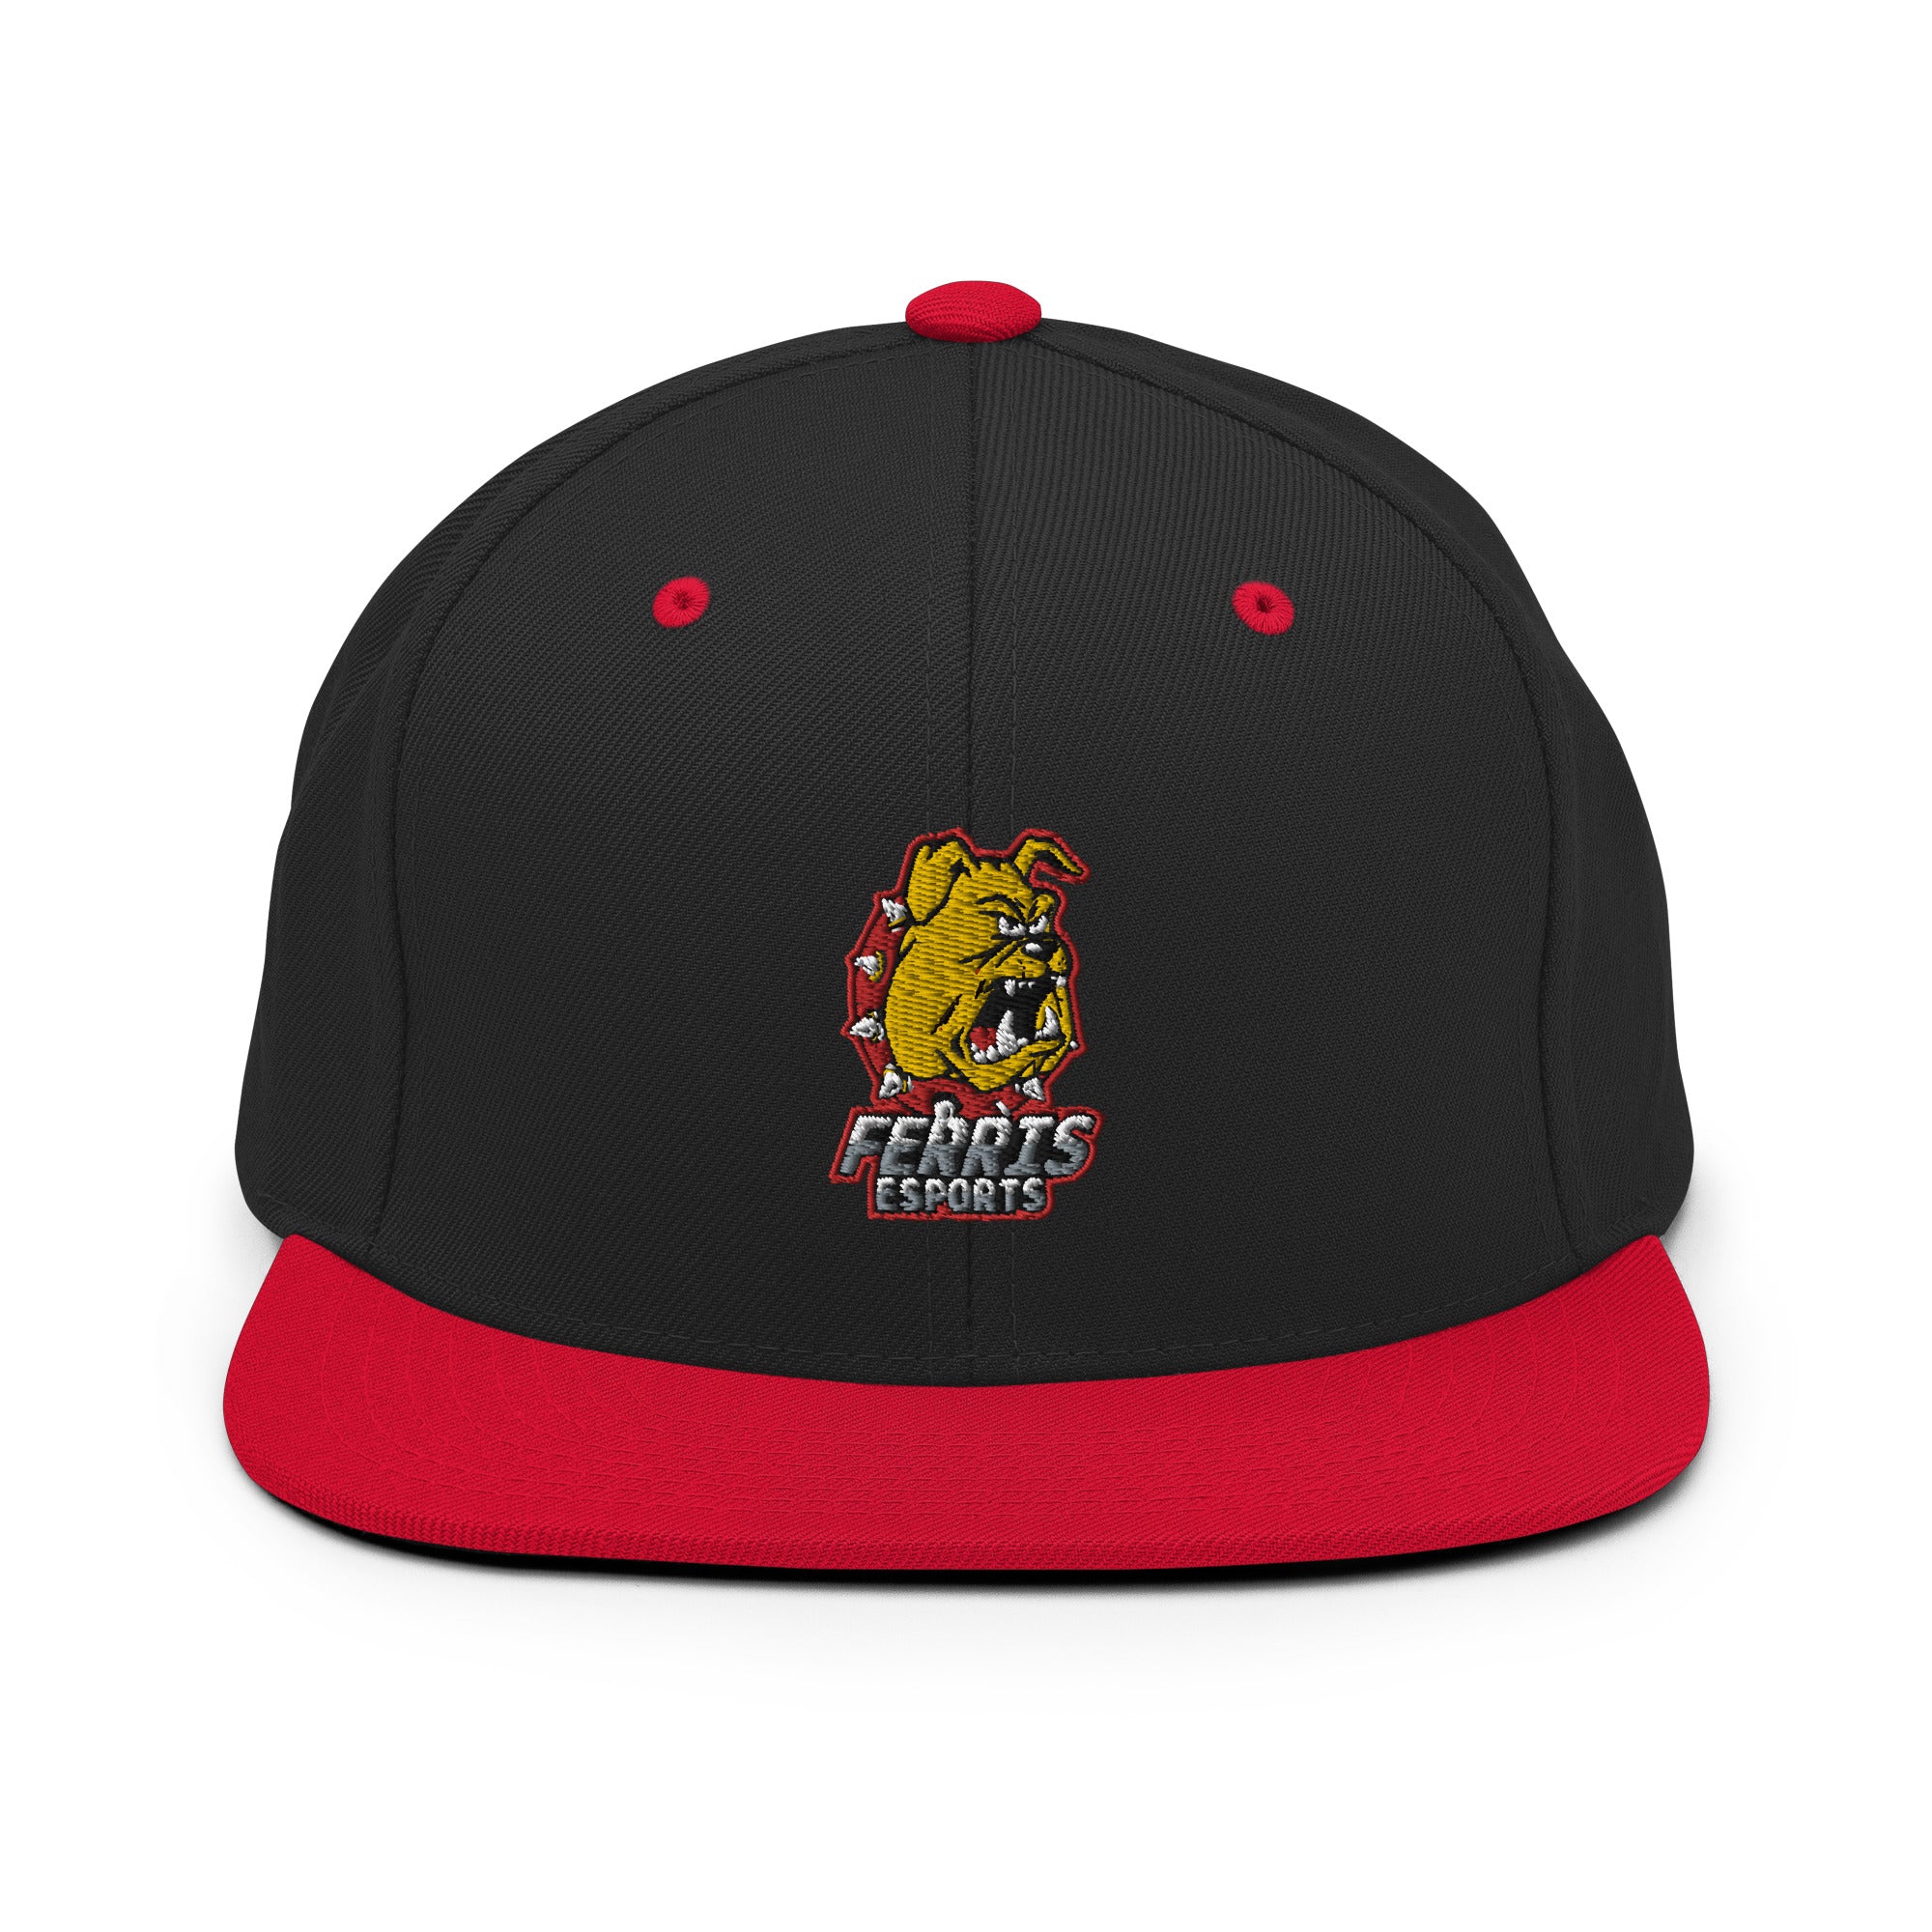 Ferris State Esports | On Demand | Embroidered Snapback Hat